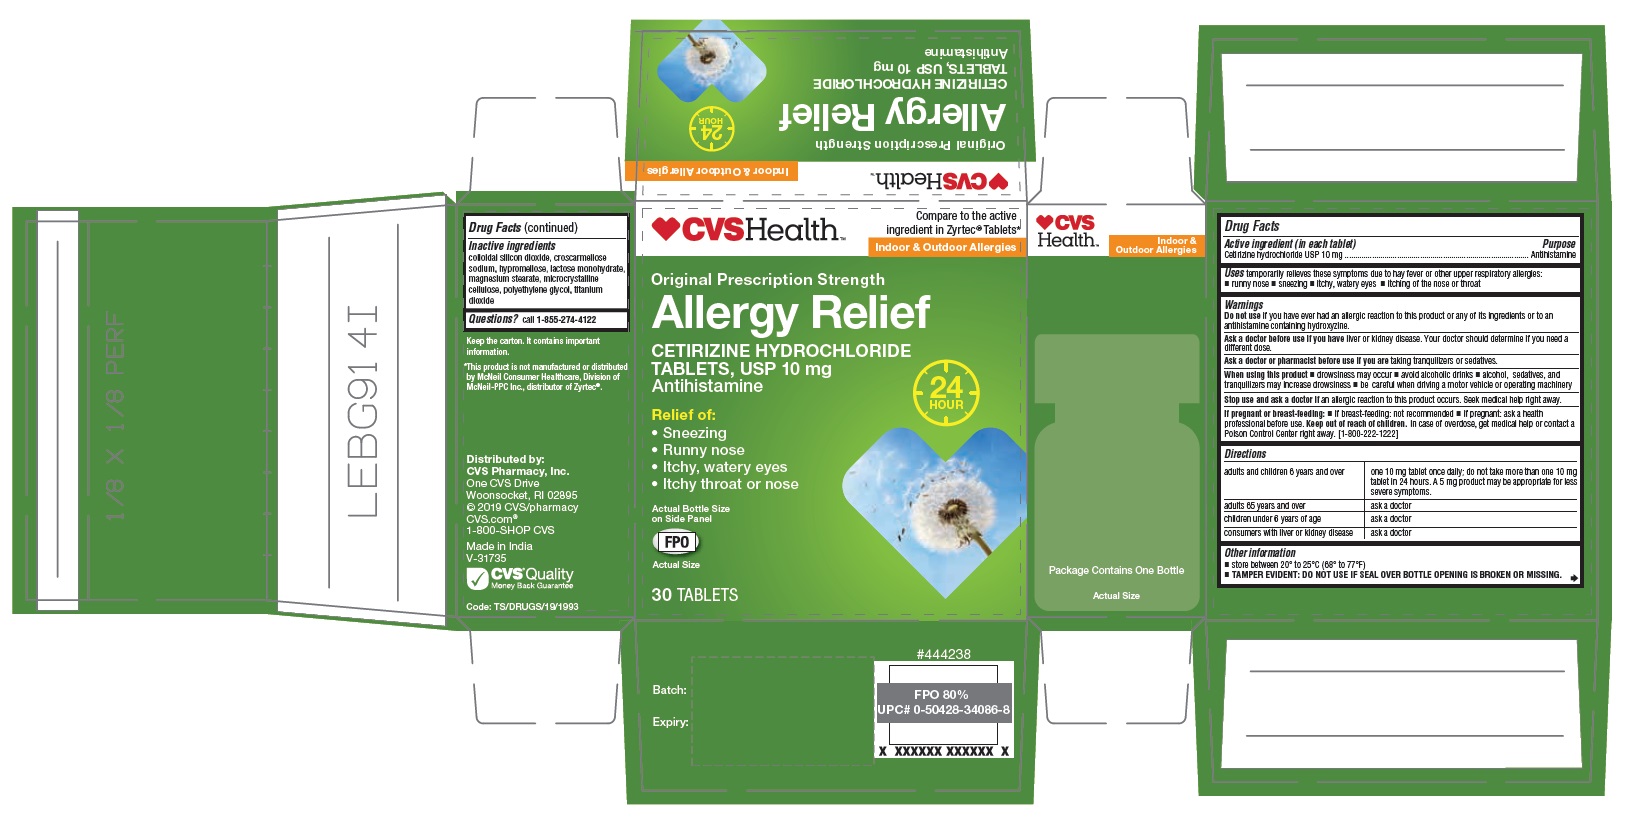 PACKAGE LABEL-PRINCIPAL DISPLAY PANEL - 10 mg (30 Tablets Container carton Label)